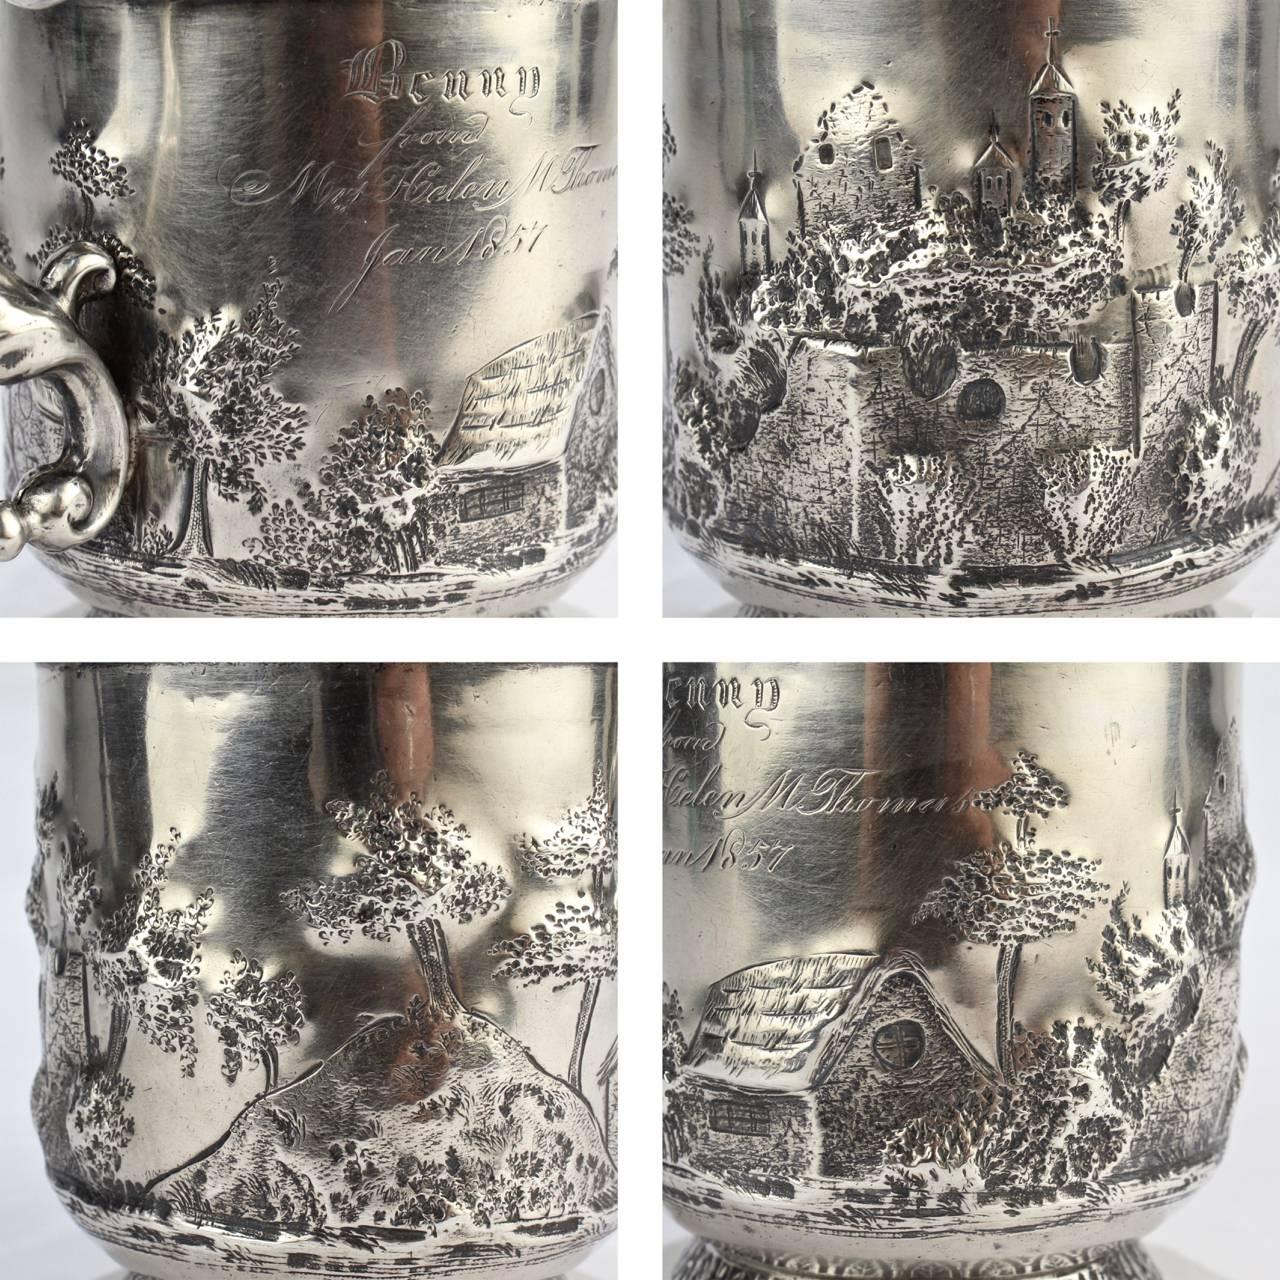 Architectural New Orleans Coin Silver Mug by Adolphe Himmel for Hyde & Goodrich In Good Condition For Sale In Philadelphia, PA